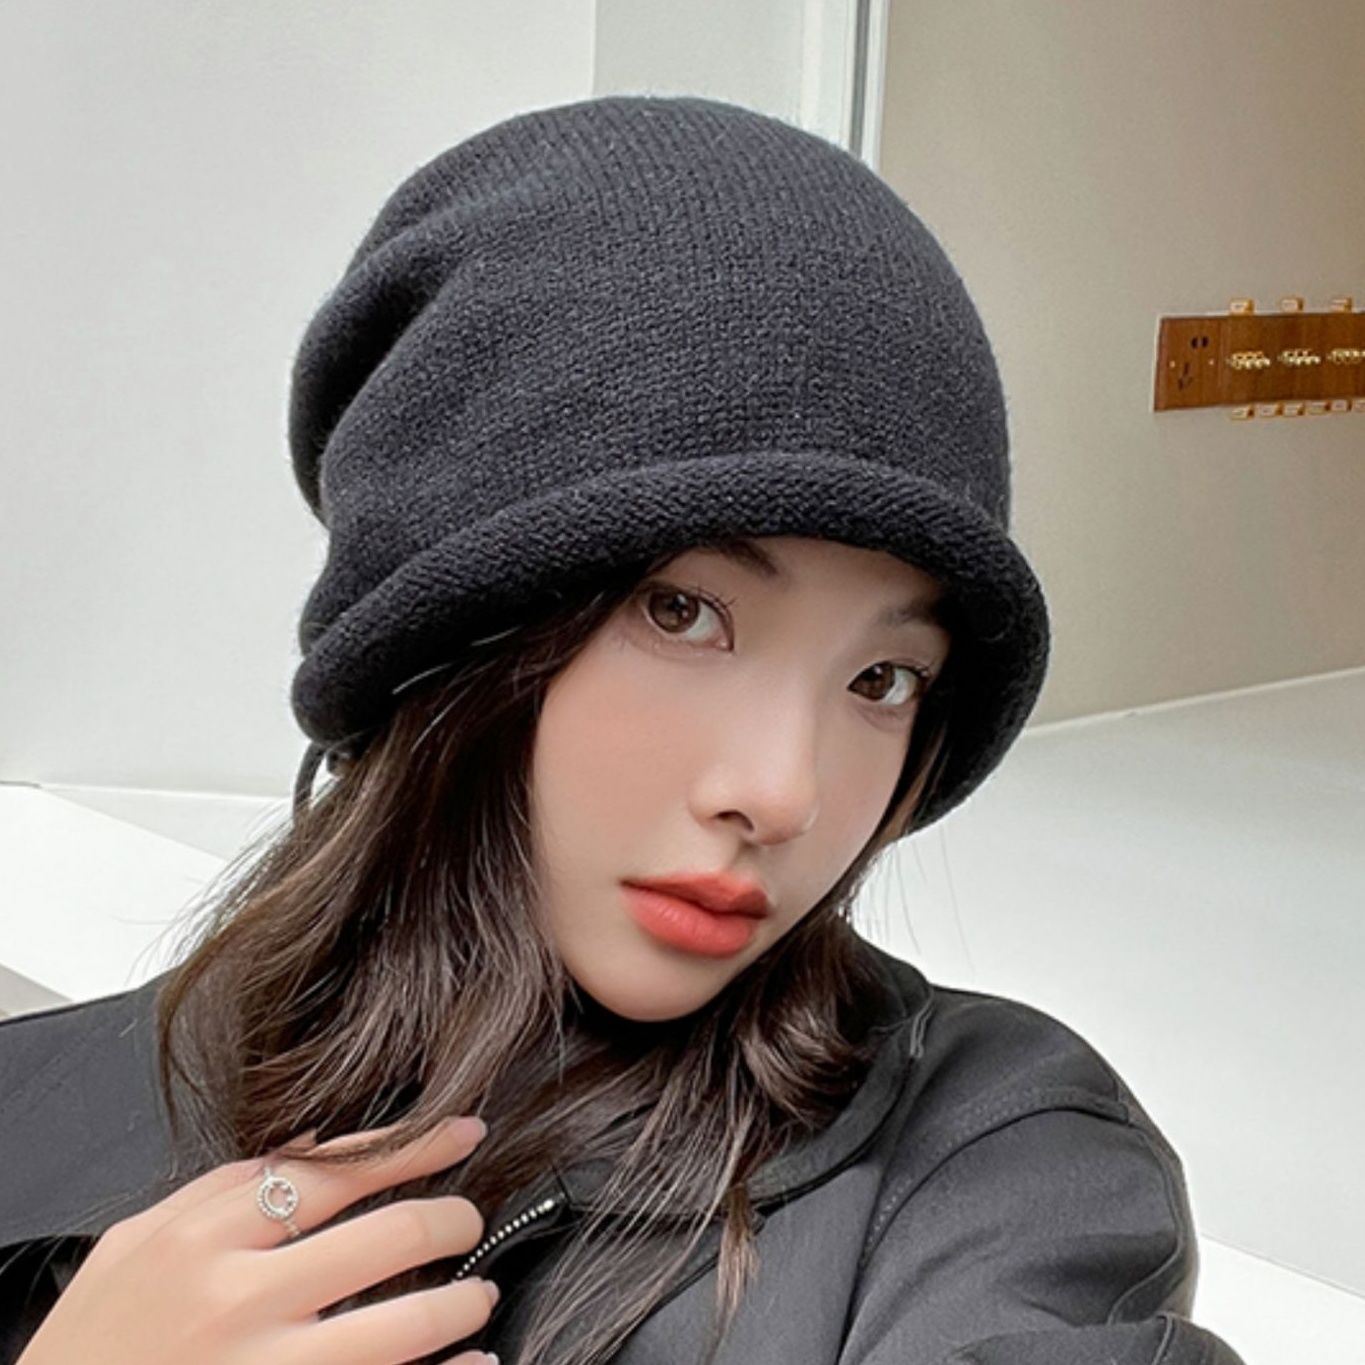 Drawstring pile hat for women, autumn and winter face-showing small cold hat, 2023 hot style warm knitted hat, Baotou woolen hat for men